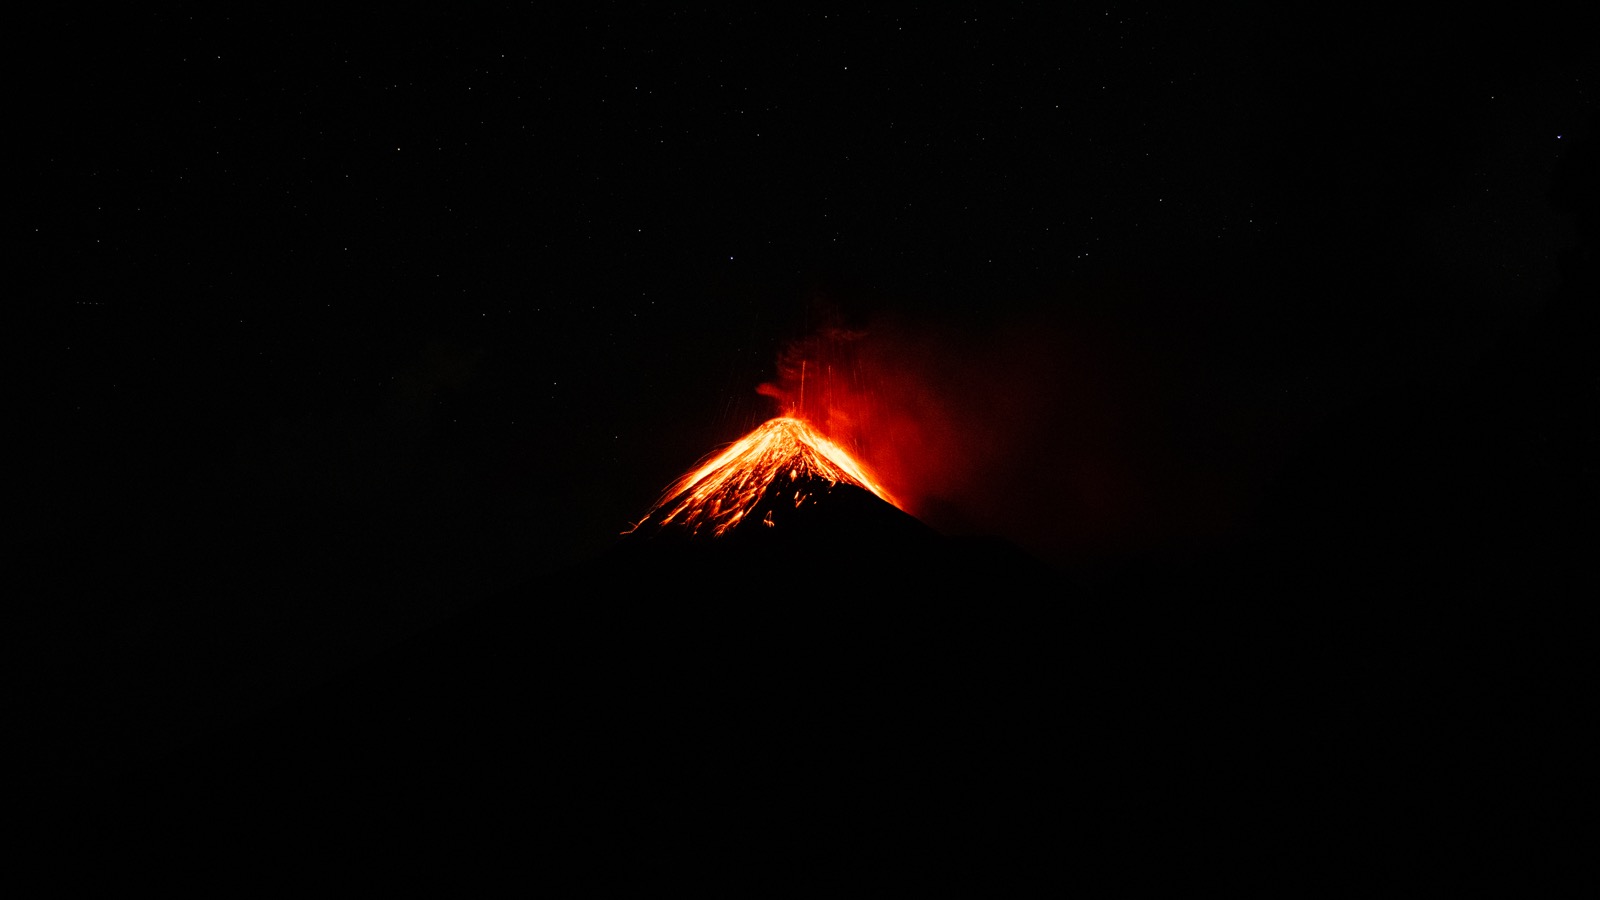 This Travel Quiz Is Scientifically Designed to Determine the Time Period You Belong in Hike the Santiaguito Volcano in Guatemala